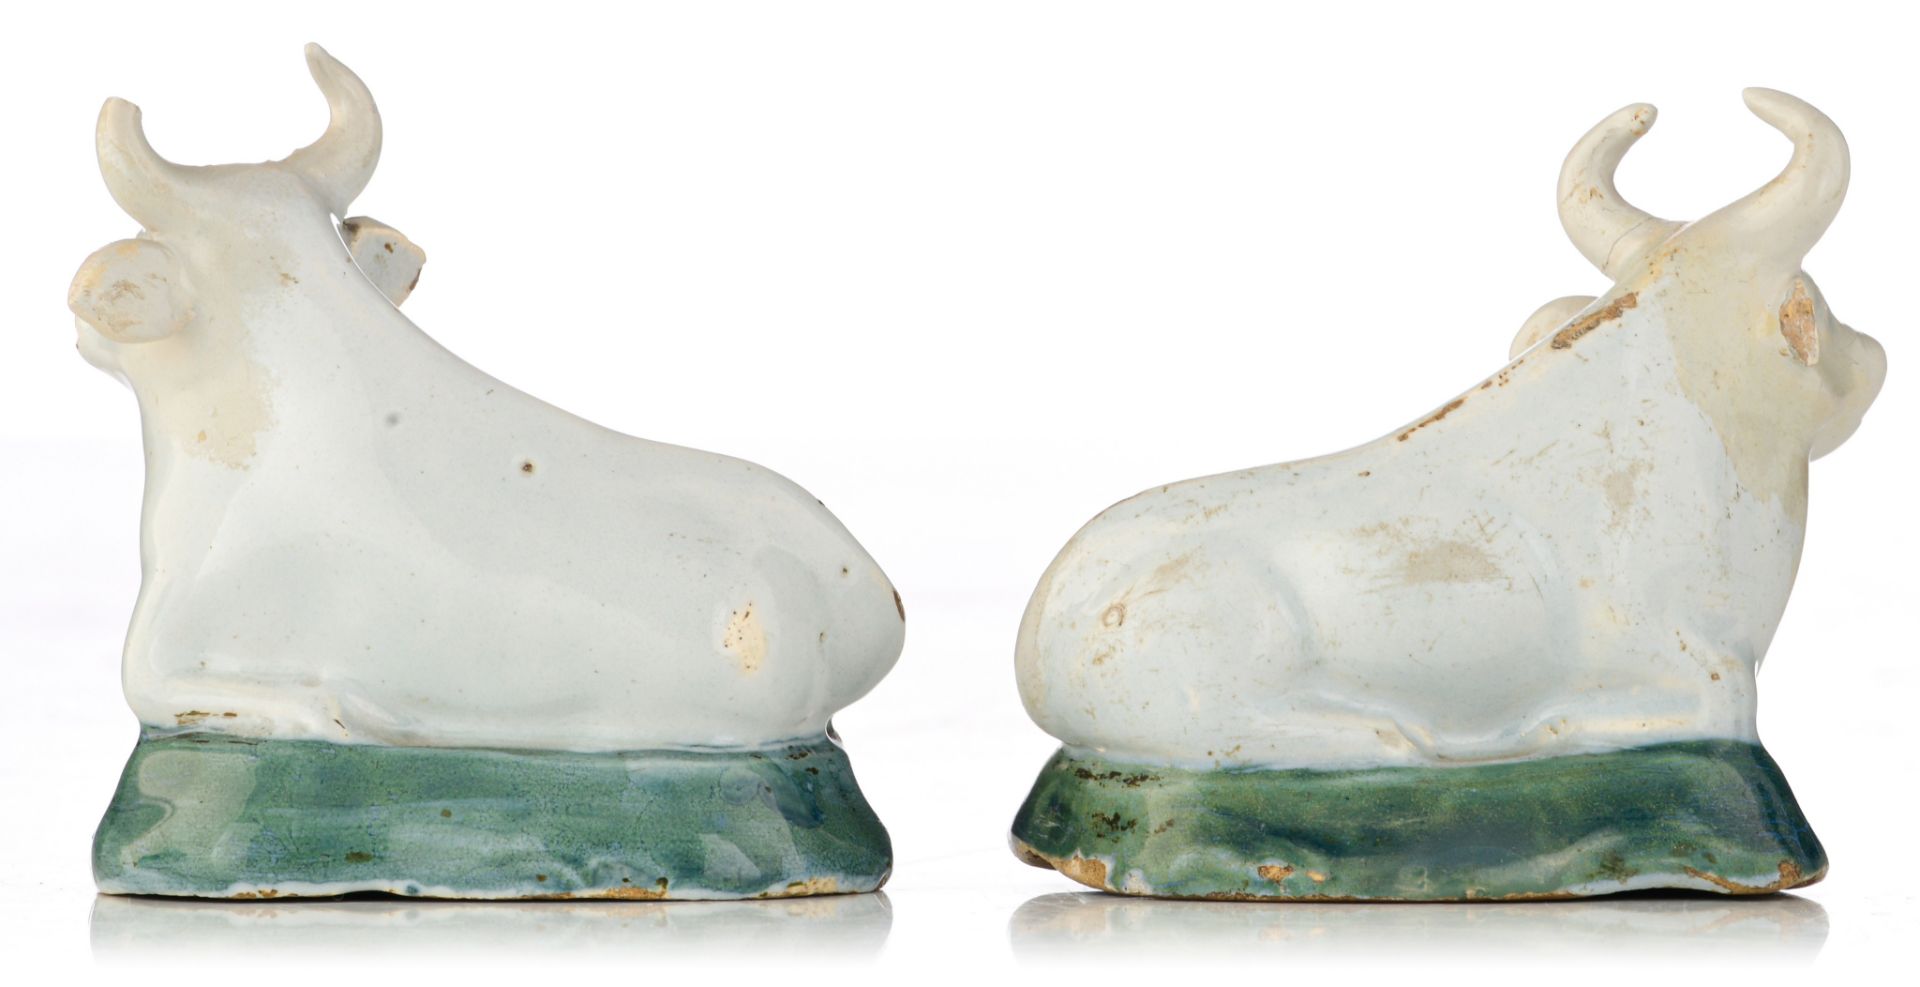 (BIDDING ONLY ON CARLOBONTE.BE) A rare pair of white Delft figures of cows, 18thC, marked Geertruy V - Image 3 of 16